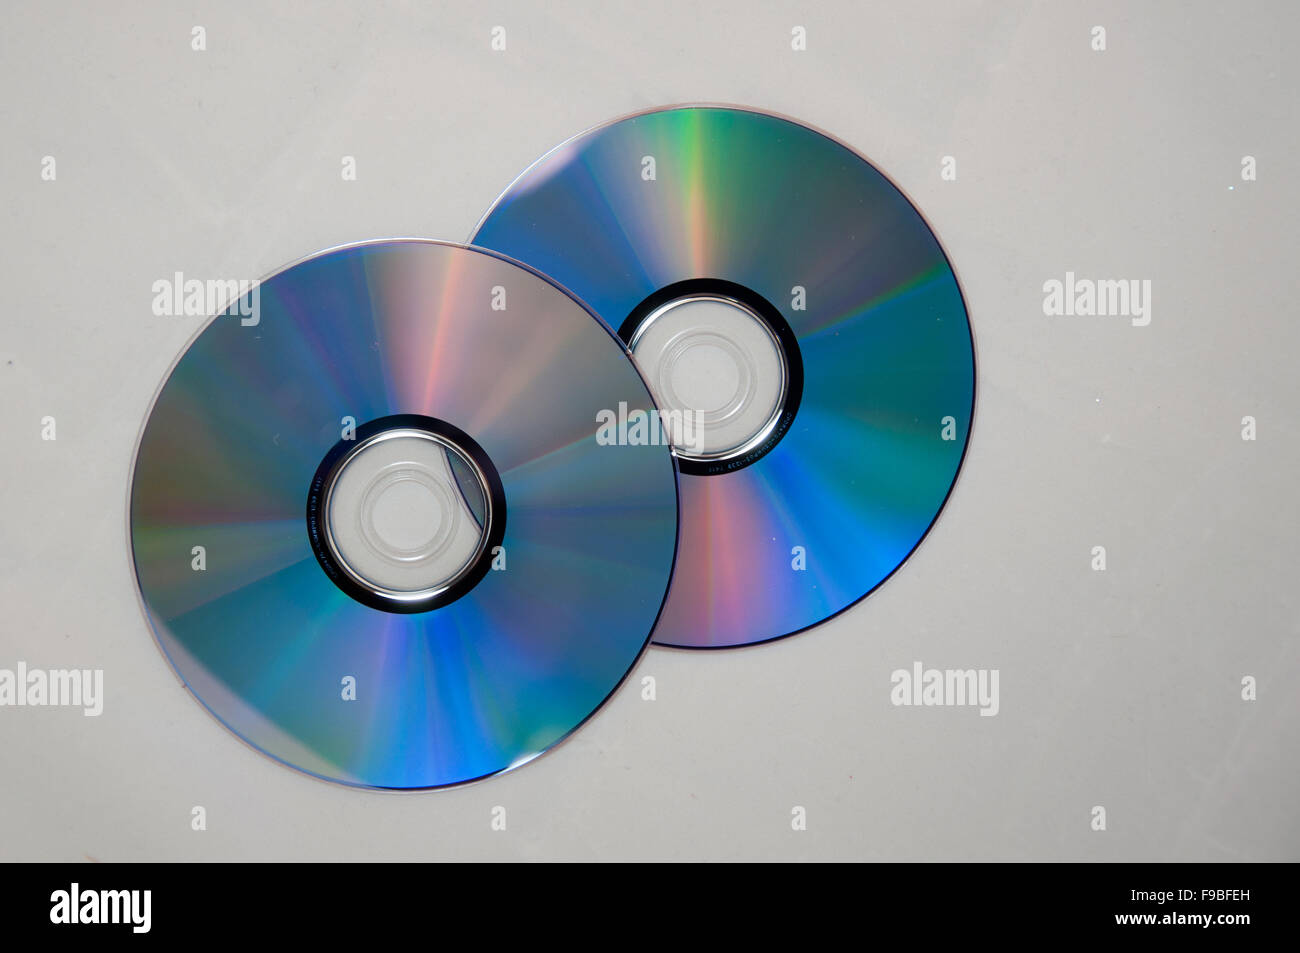 Two music compact discs or cd dvd vcd blueray Stock Photo